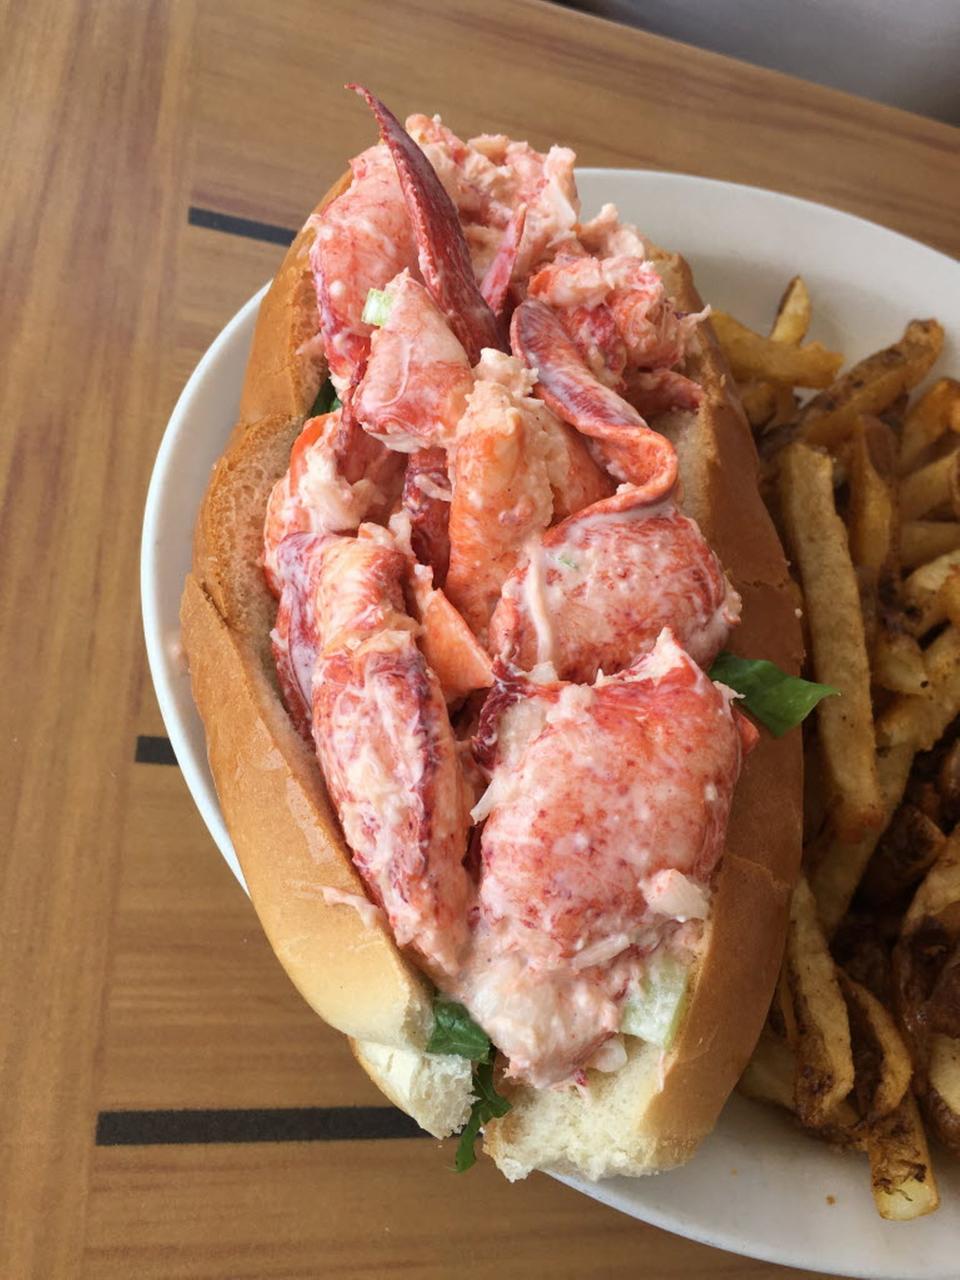 The lobster roll at Matunuck Oyster Bar, in South Kingstown, includes larger-than-average chunks of lobster, artfully arranged in a hefty split-top roll warmed with lots of butter.